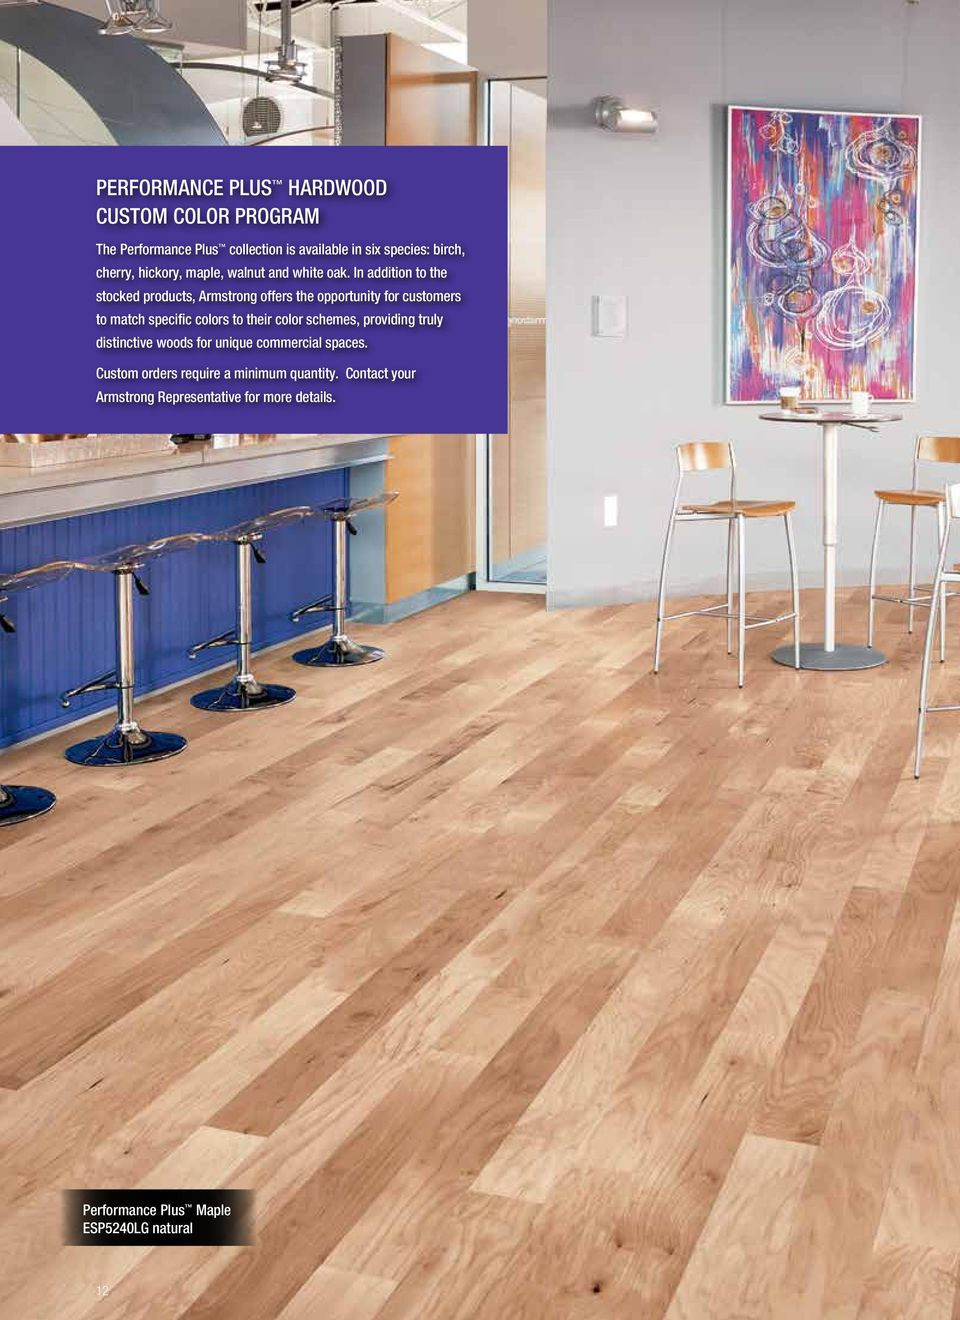 armstrong hardwood flooring prices of performance plus midtown pdf with regard to in addition to the stocked products armstrong offers the opportunity for customers to match specific